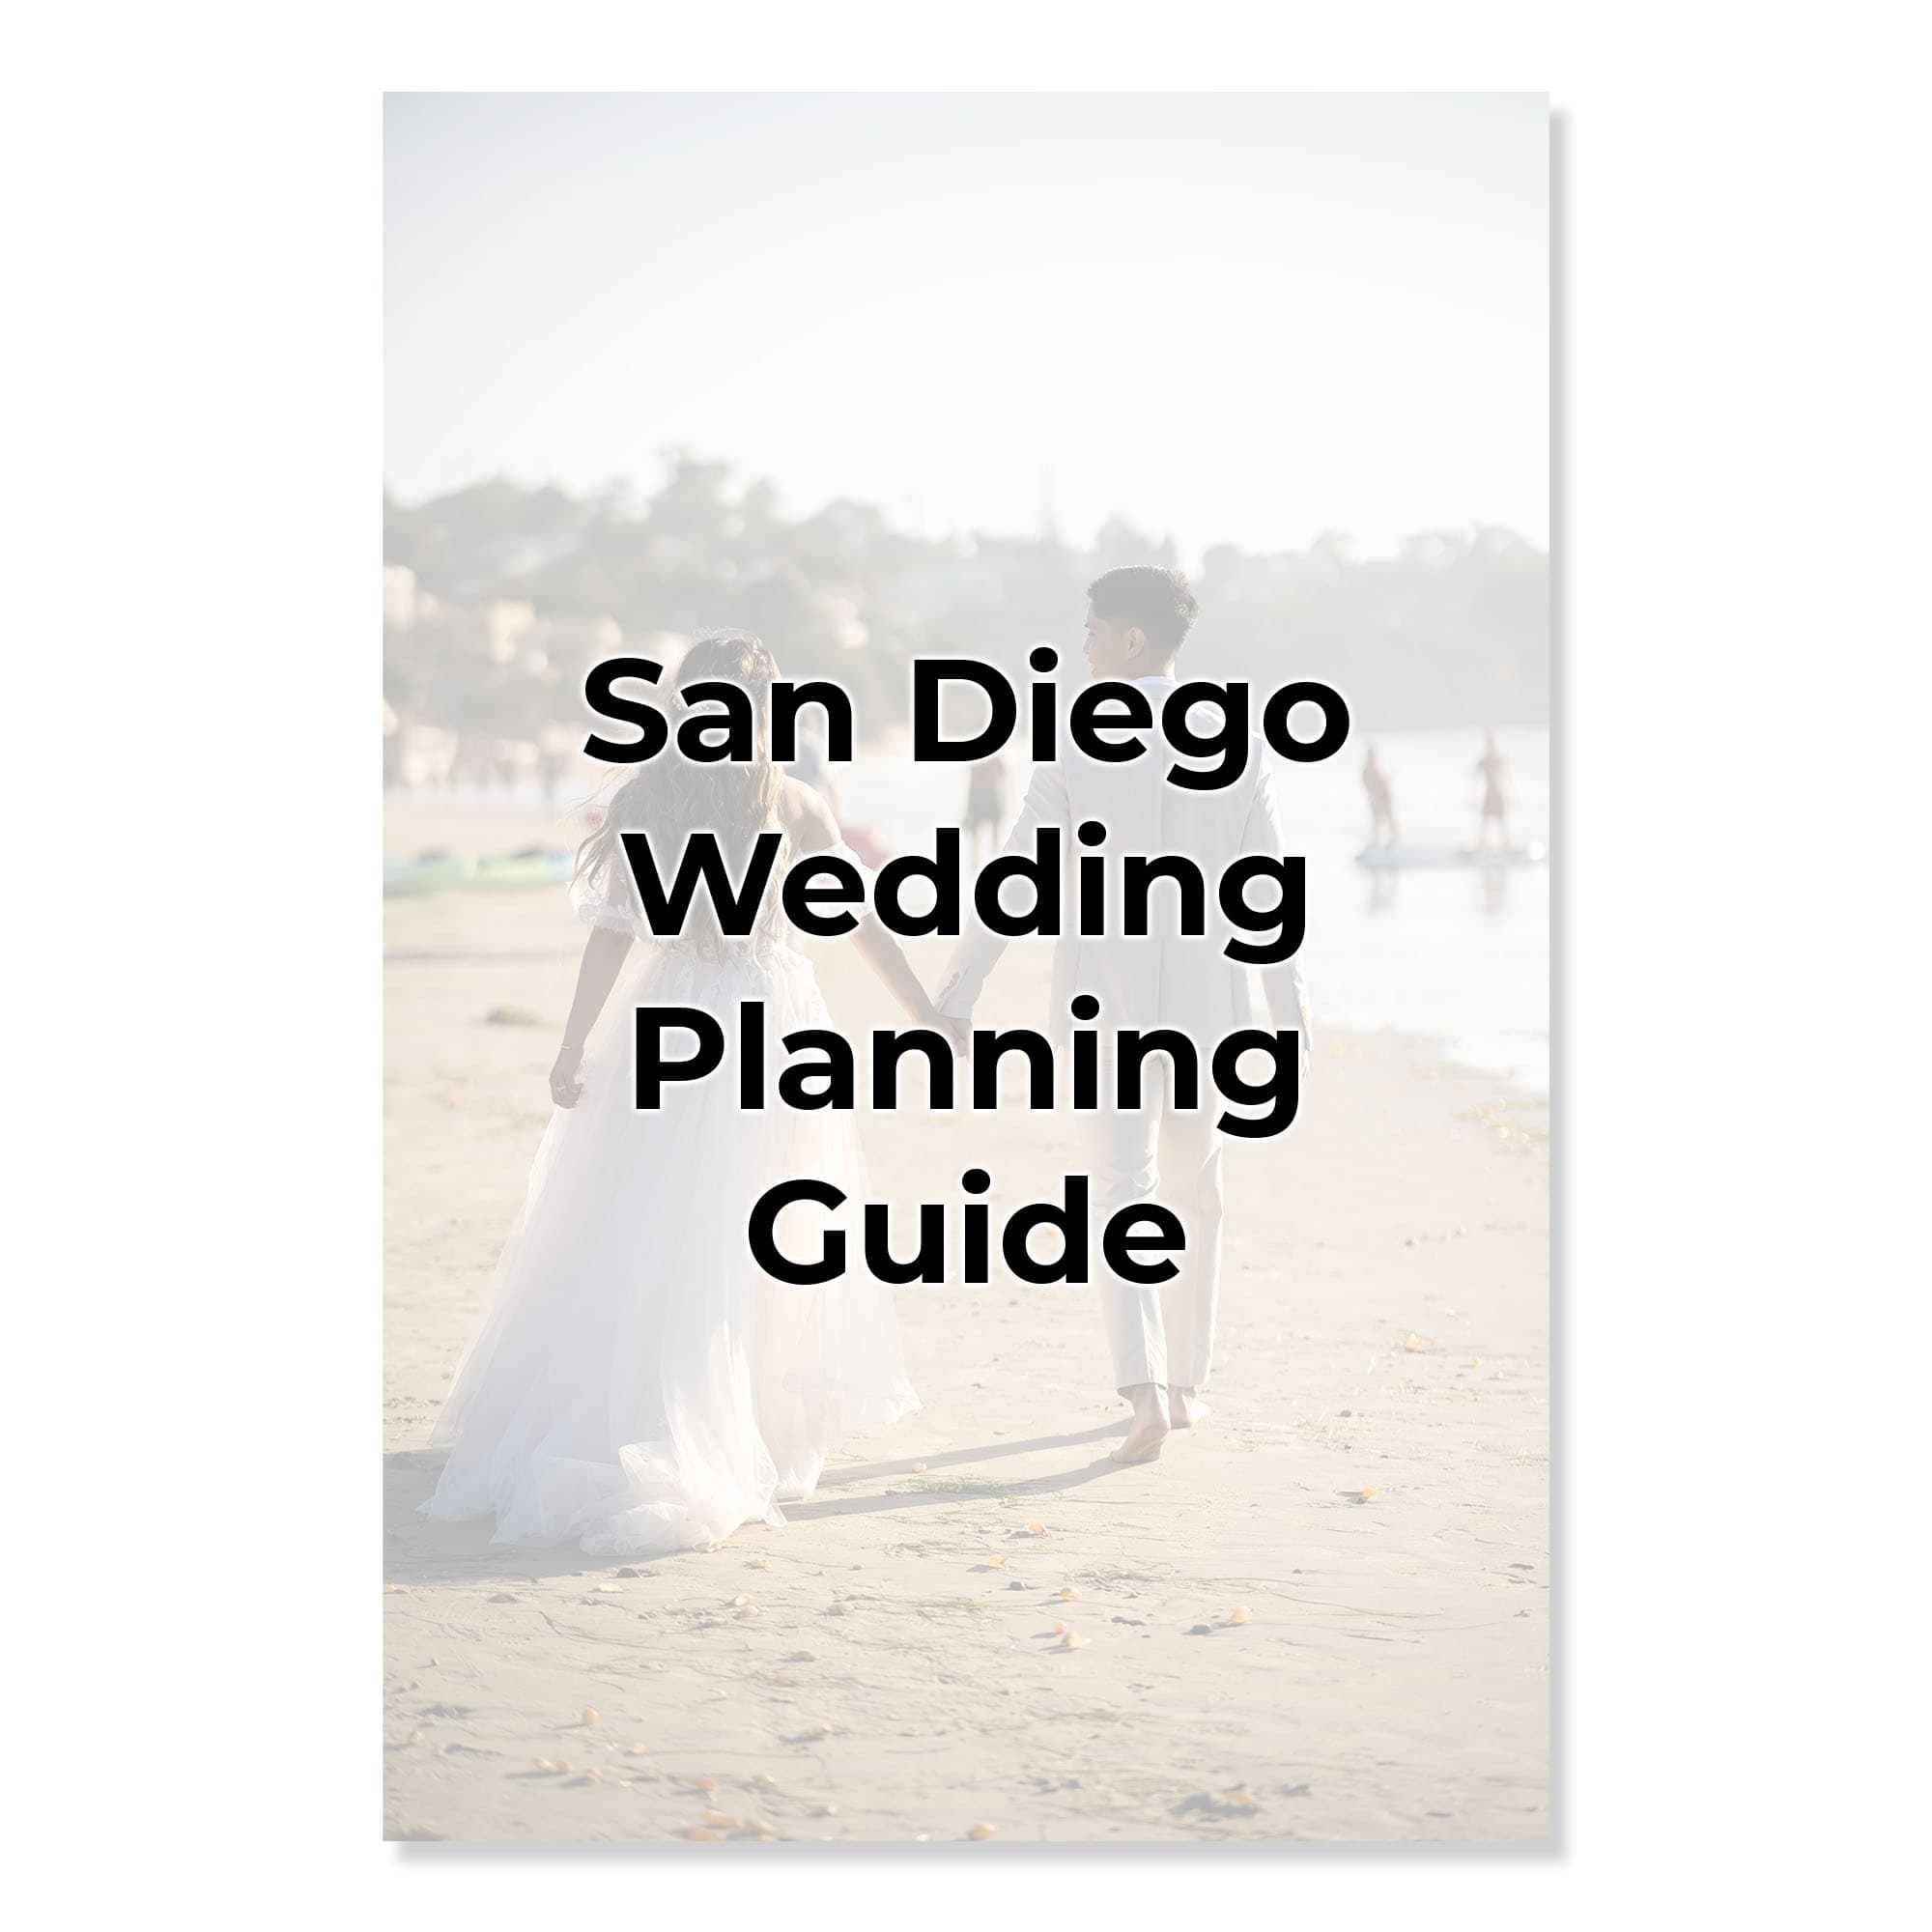 How to Plan a Wedding In San Diego